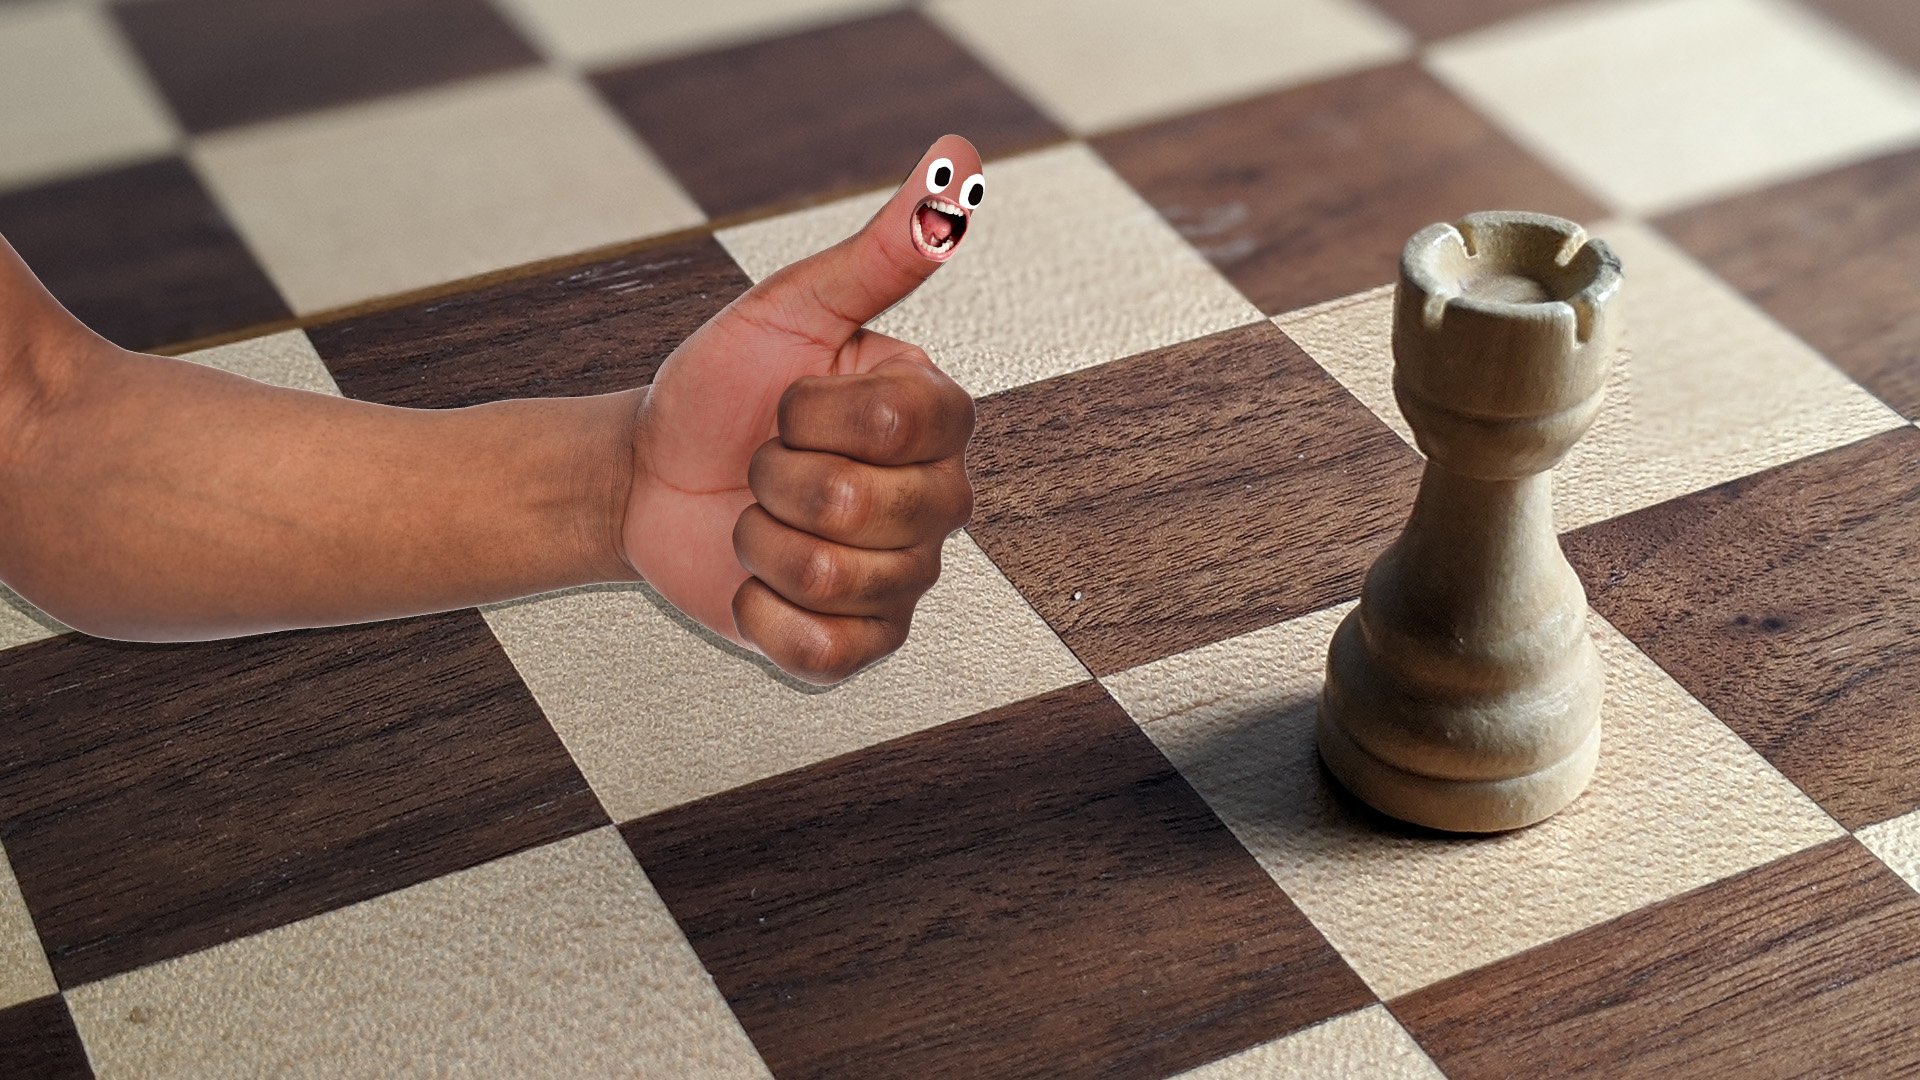 A screaming thumb and a Chess piece